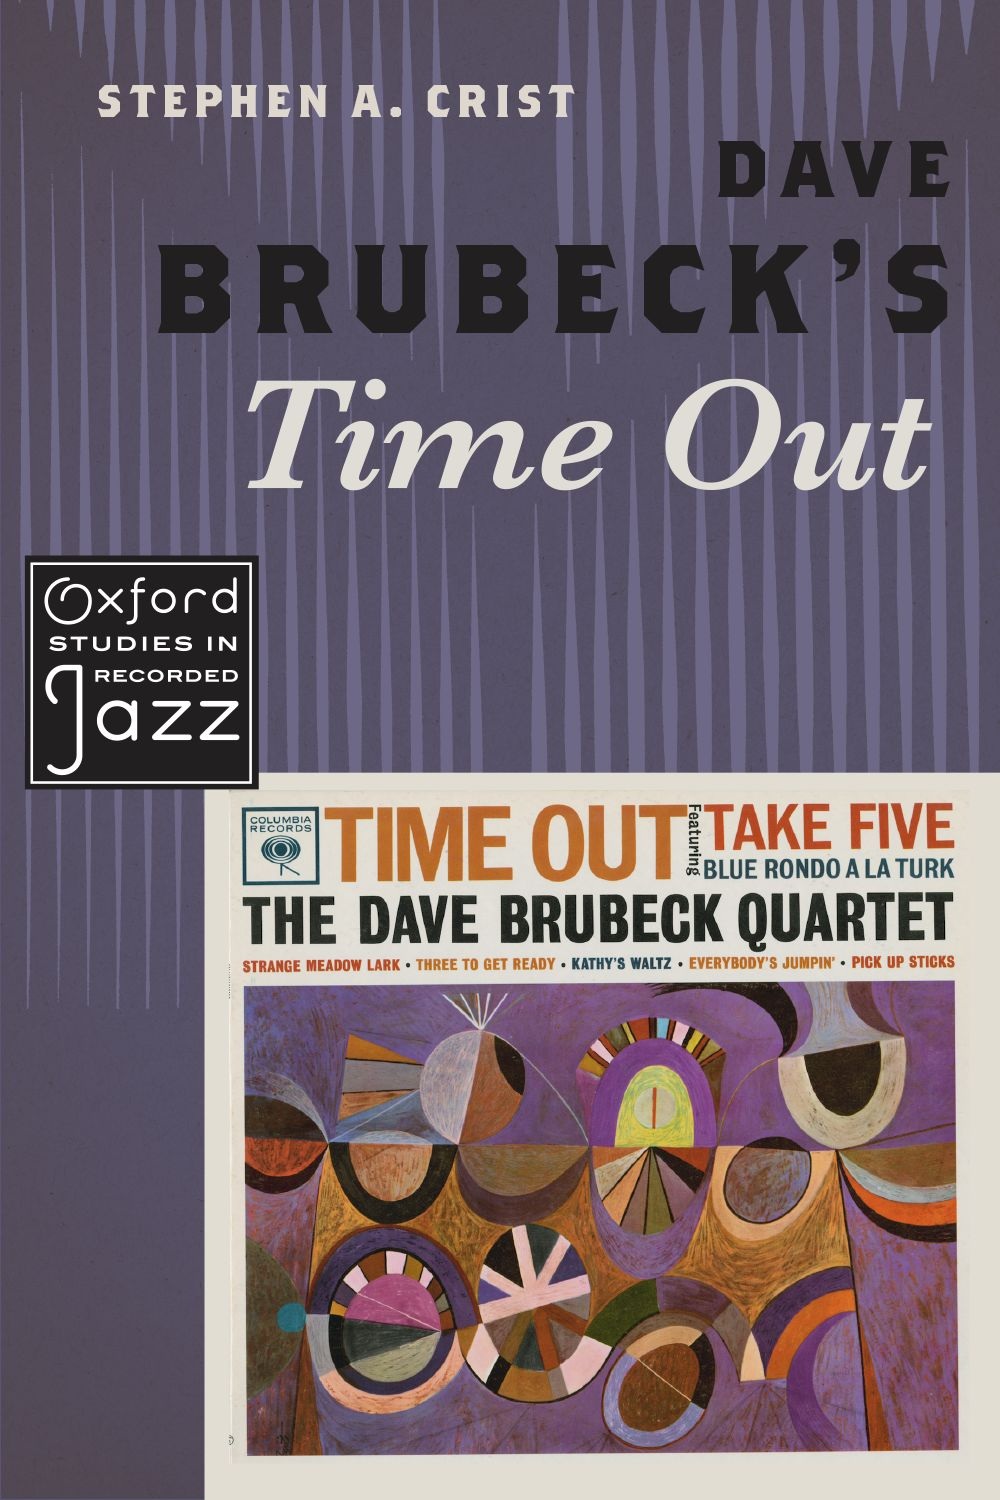 Dave Brubeck's Time Out: Reference